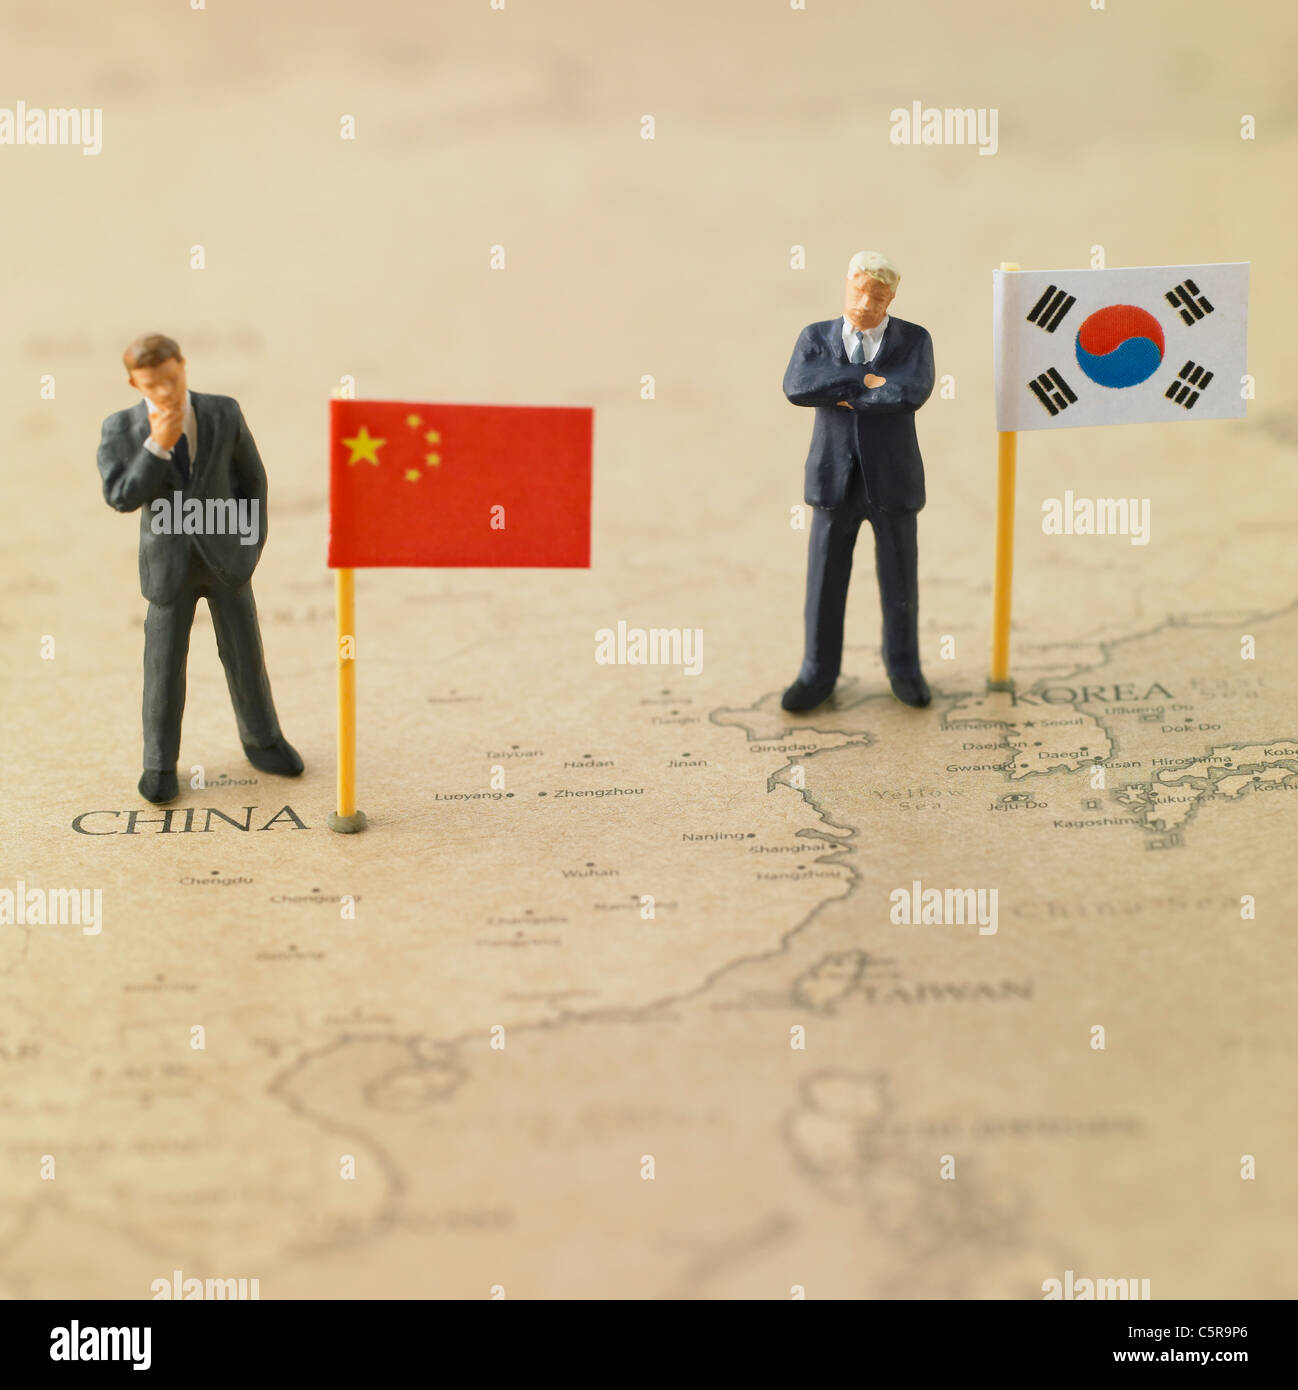 Flags from different countries on a world map with figurines Stock Photo